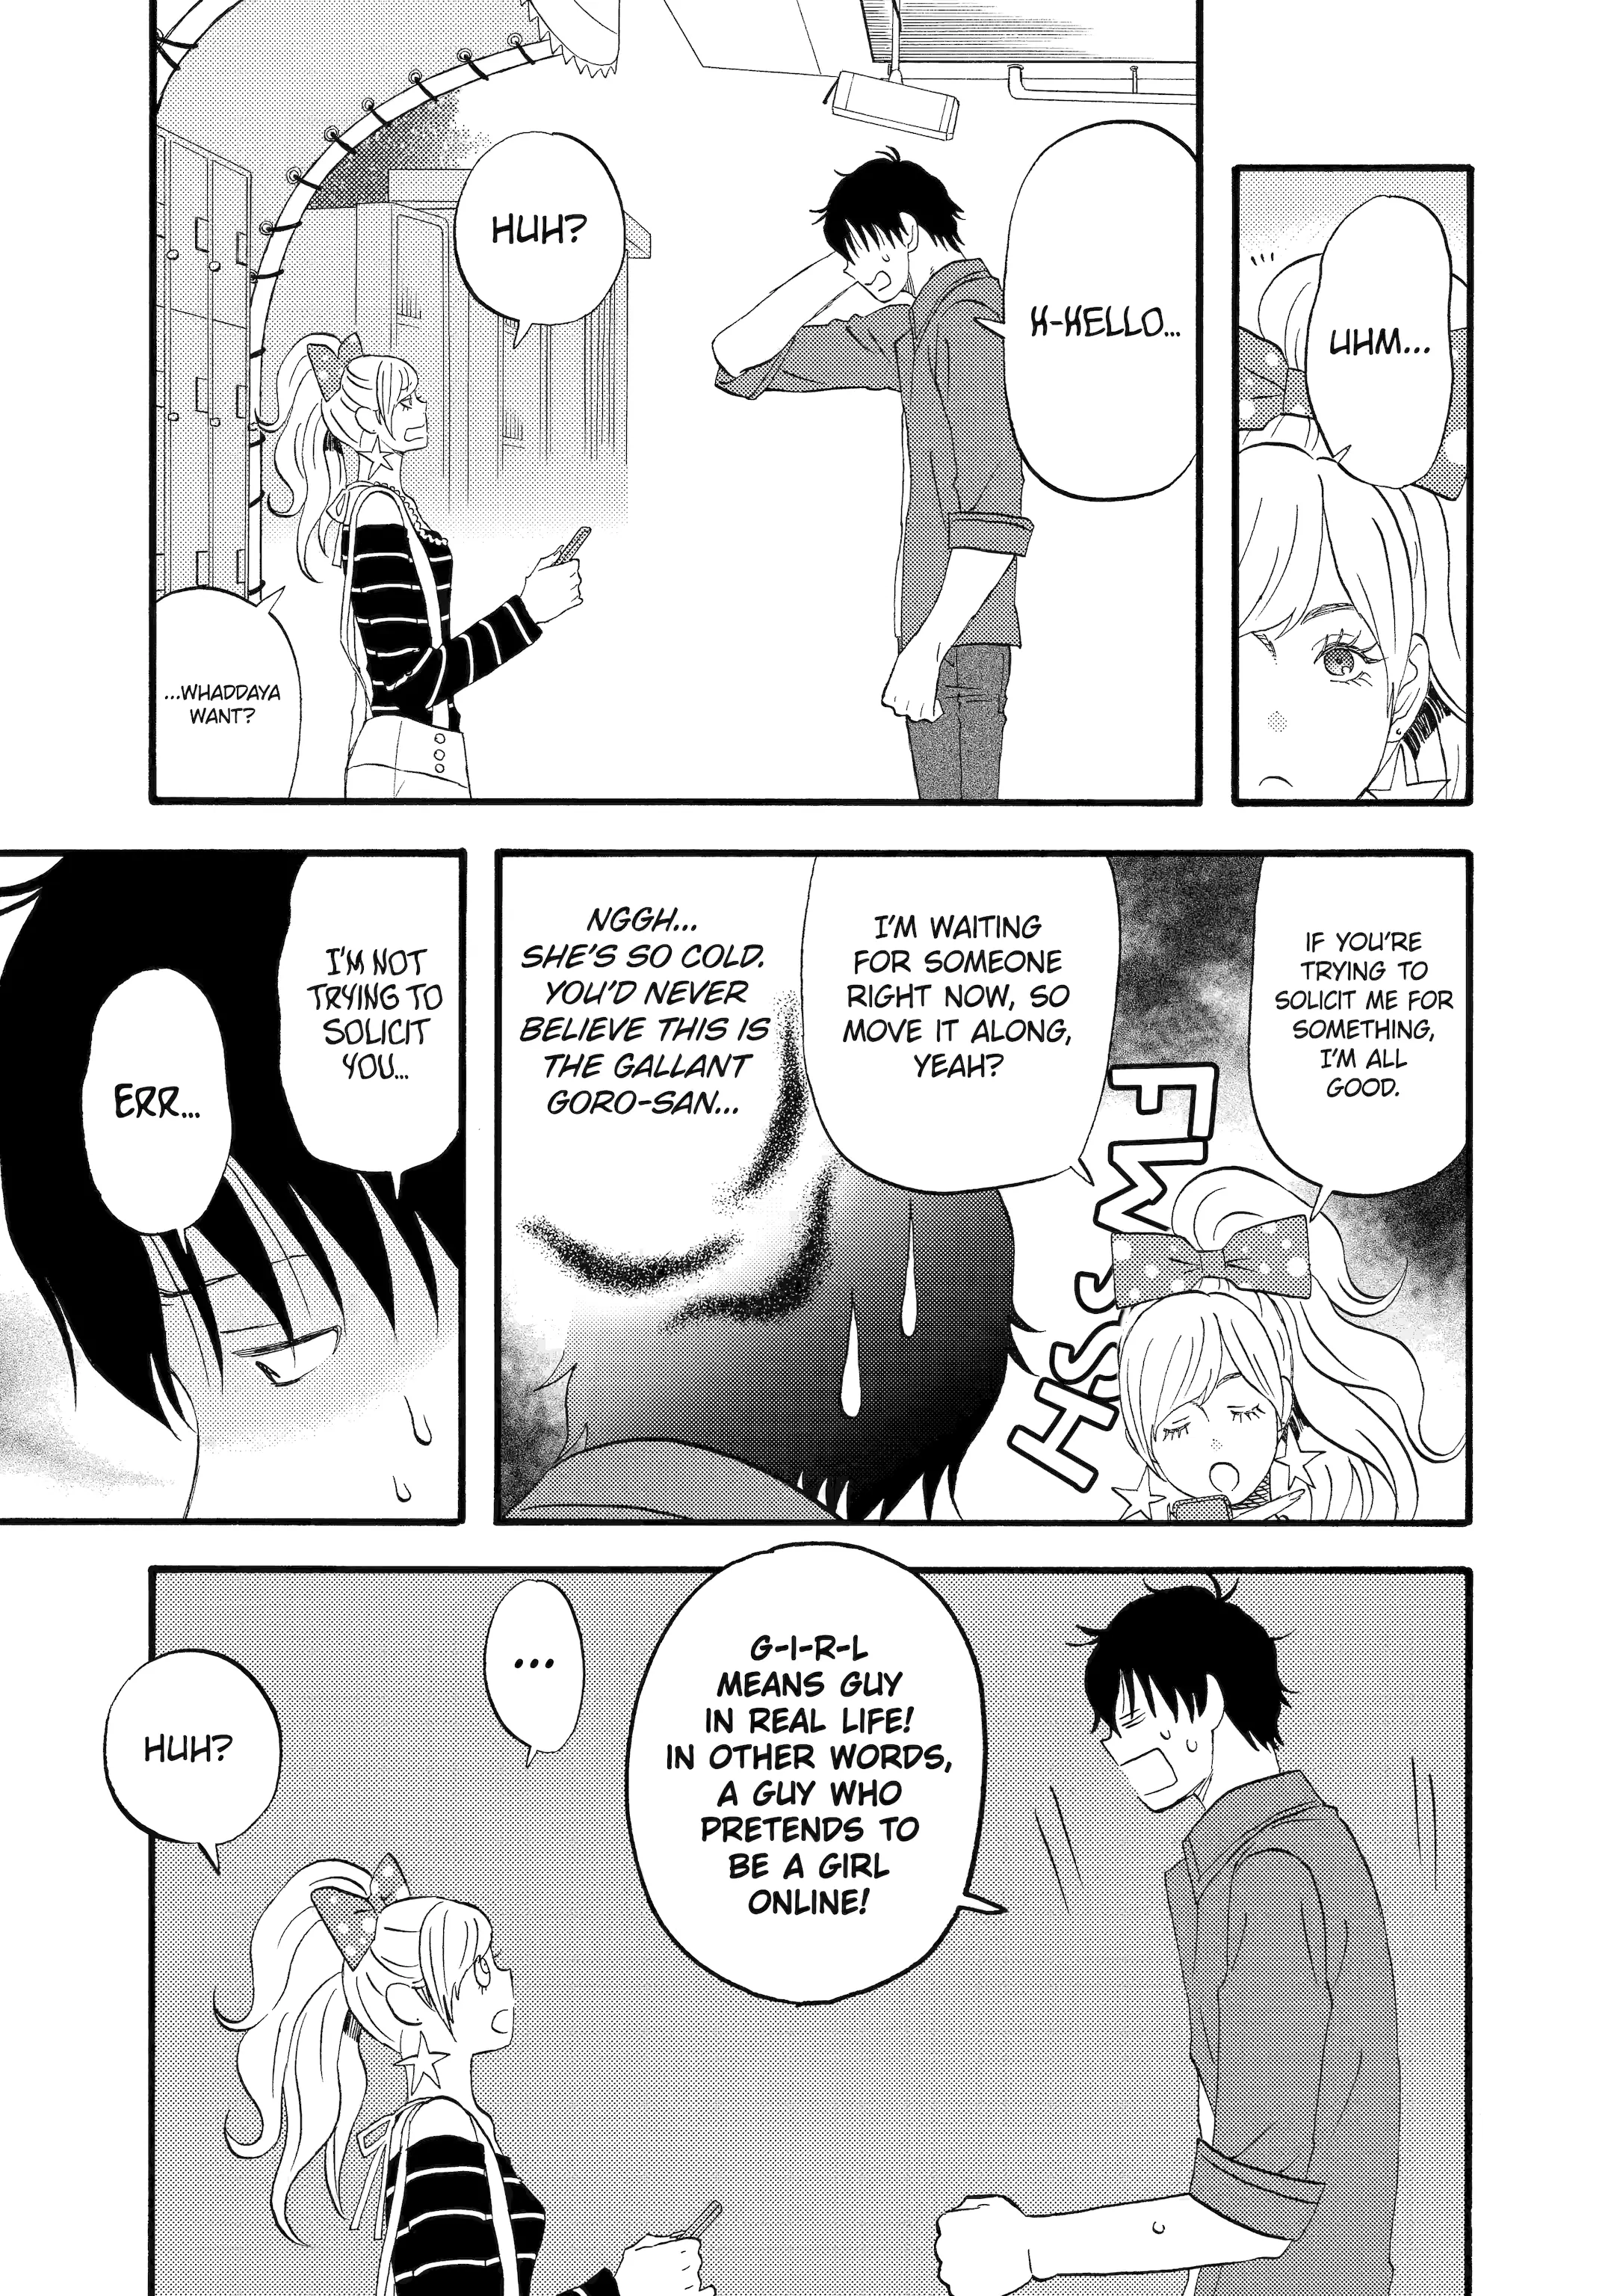 Rooming with a Gamer Gal - chapter 2 - #5